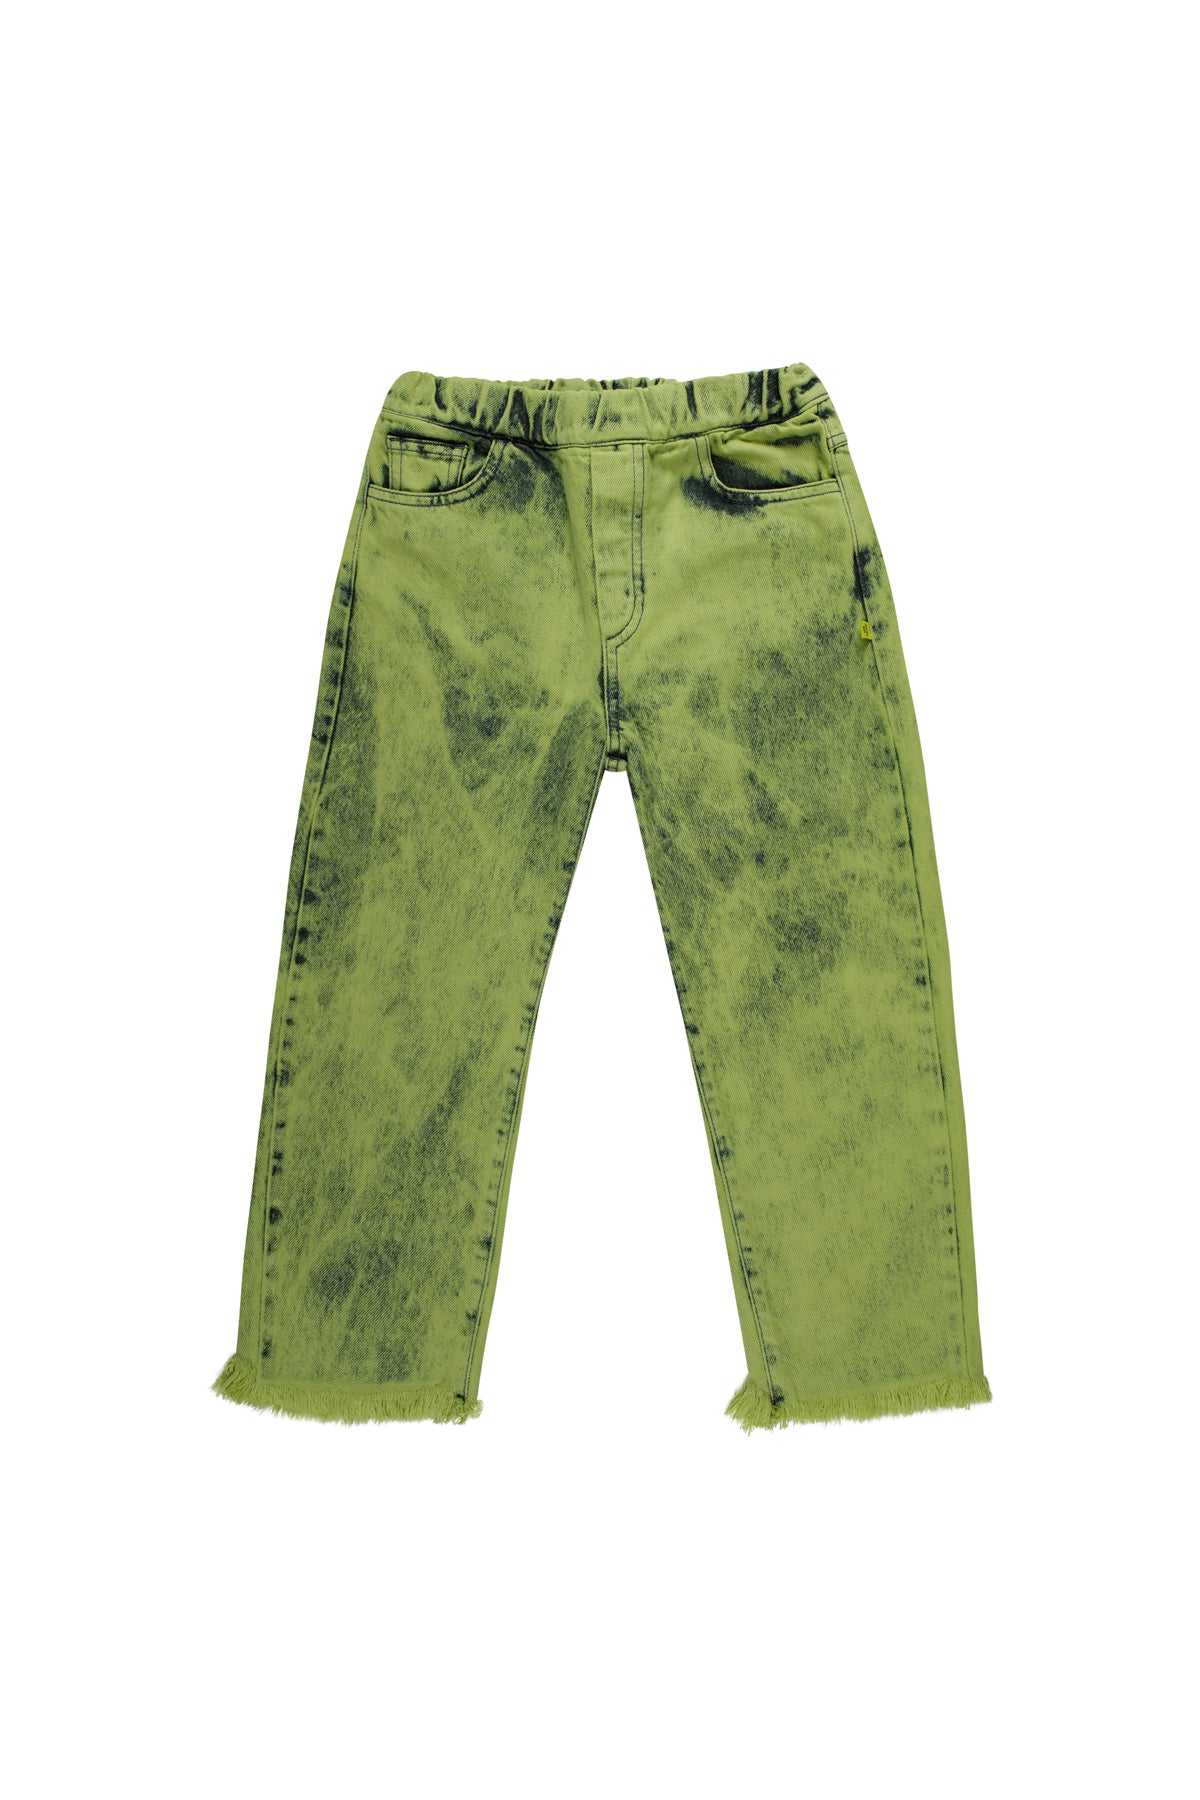 GREEN BAGGY TROUSERS makids